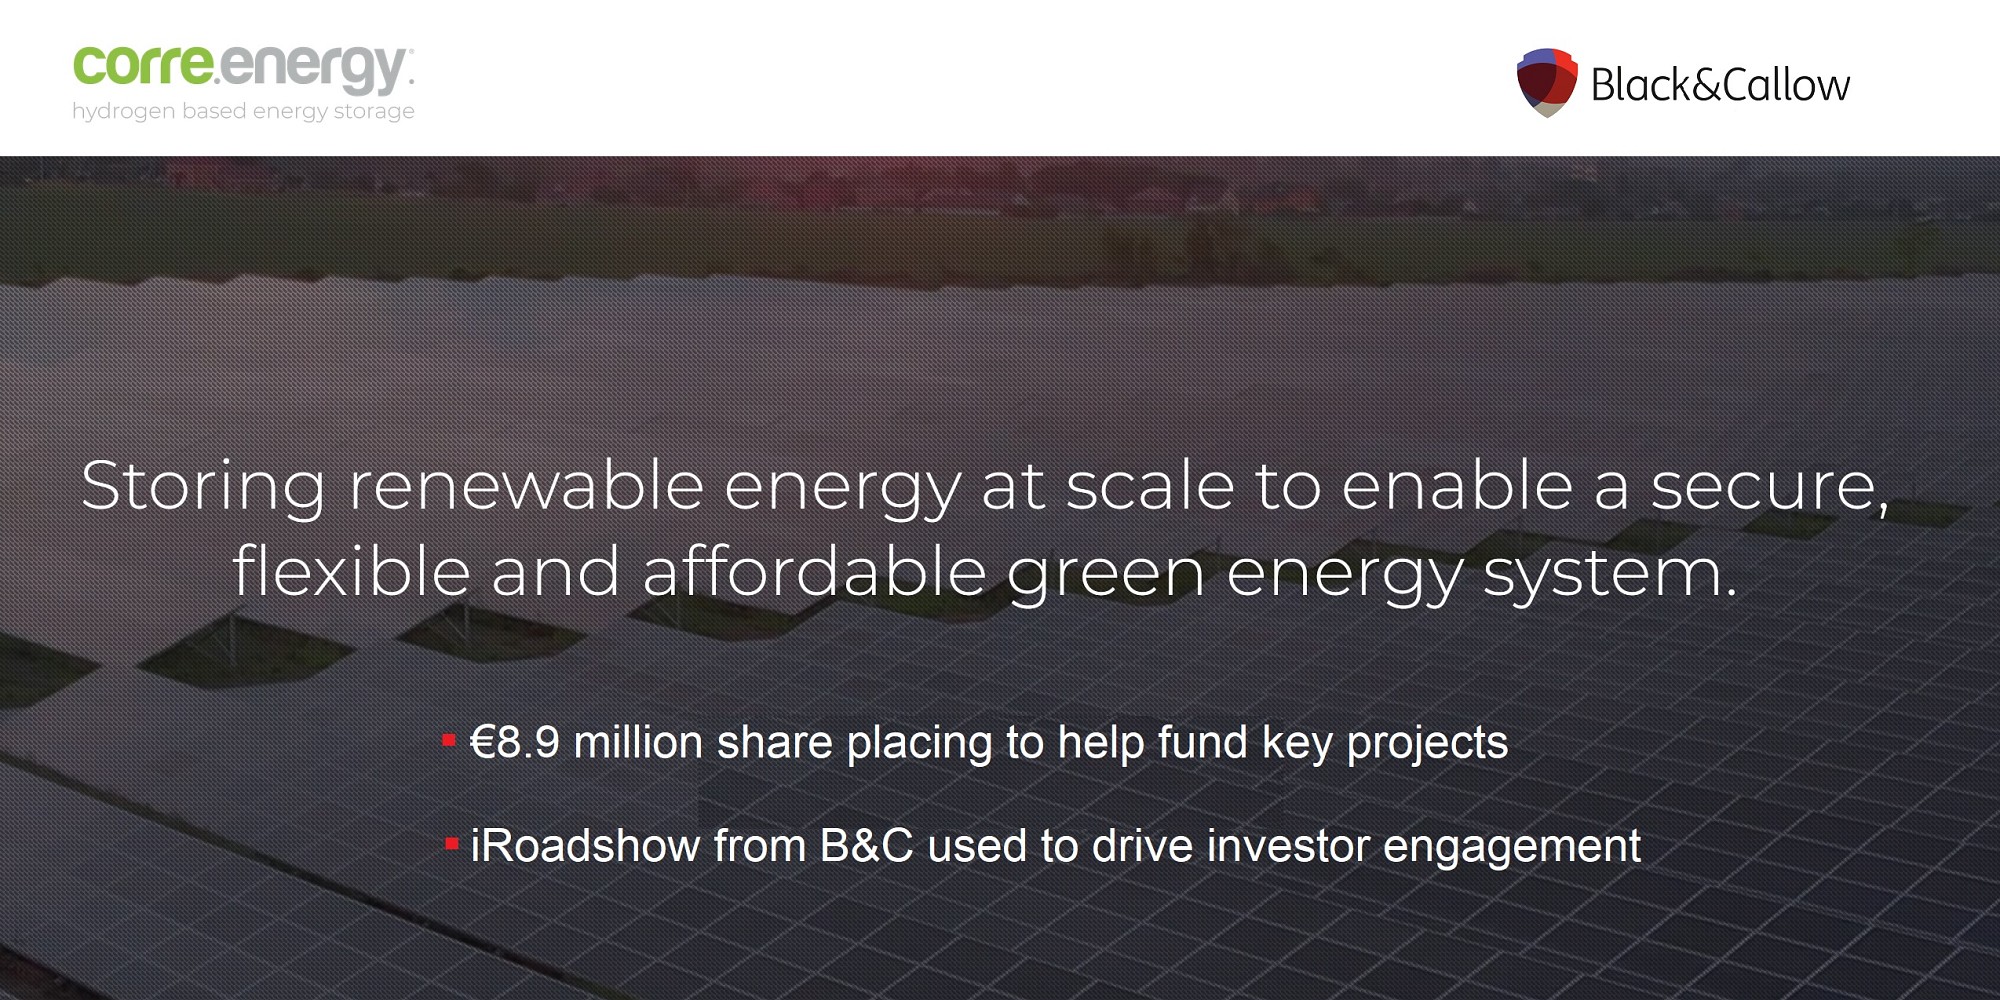 iRoadshow helps Corre Energy engage with investors to raise €8.9m